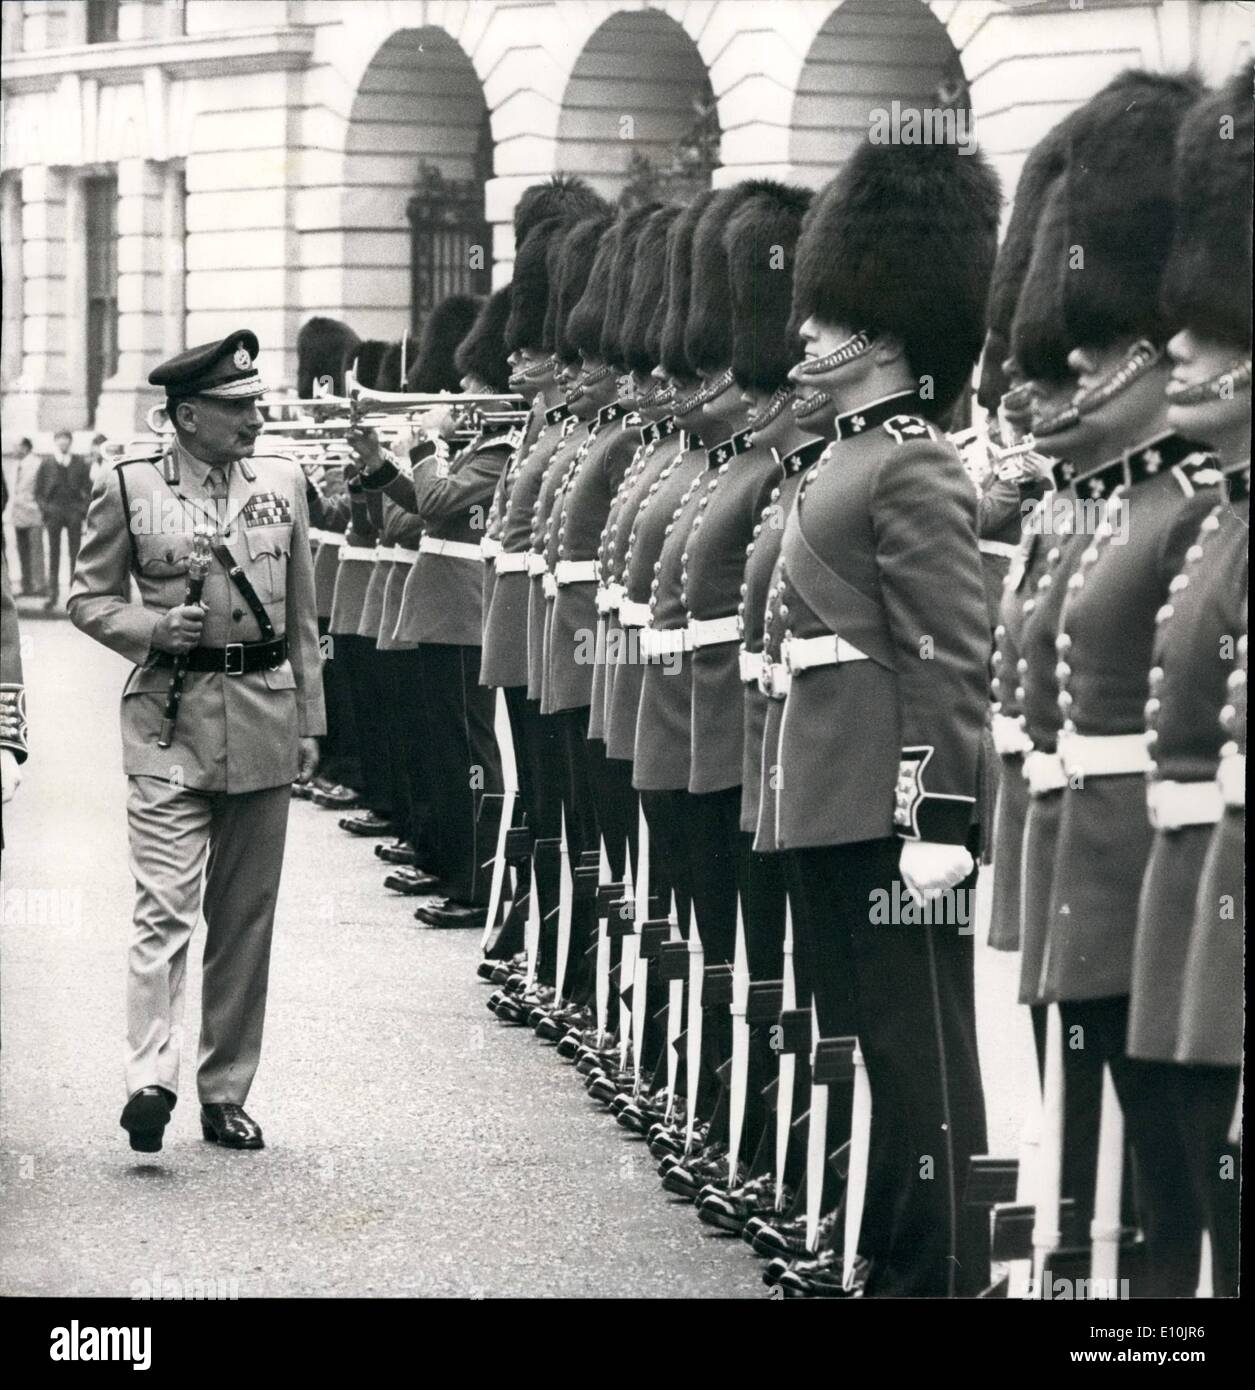 Apr. 16, 1973 - April 16th 1973 Field Marshal Manekshaw, Indian Army. Field Marshal S.H.F.J. Manekshaw, MC., Indian Army, who is on a visit ot the United Kingdom, this morning went to the Ministry of Defence, London where he was greeted by Chief of General Staff, General Sir Michael Carver, and a Guard of Honour found by 1st Battalion The Irish Guards, with the Band of Coldstream Guards in attendance. Field Marshal Manekshaw held the appointment of Chief of the Army staff India from June 8, 1969 to Jan 15, 1973. He is the first Indian officer to hold the rank of Field Marshal Stock Photo